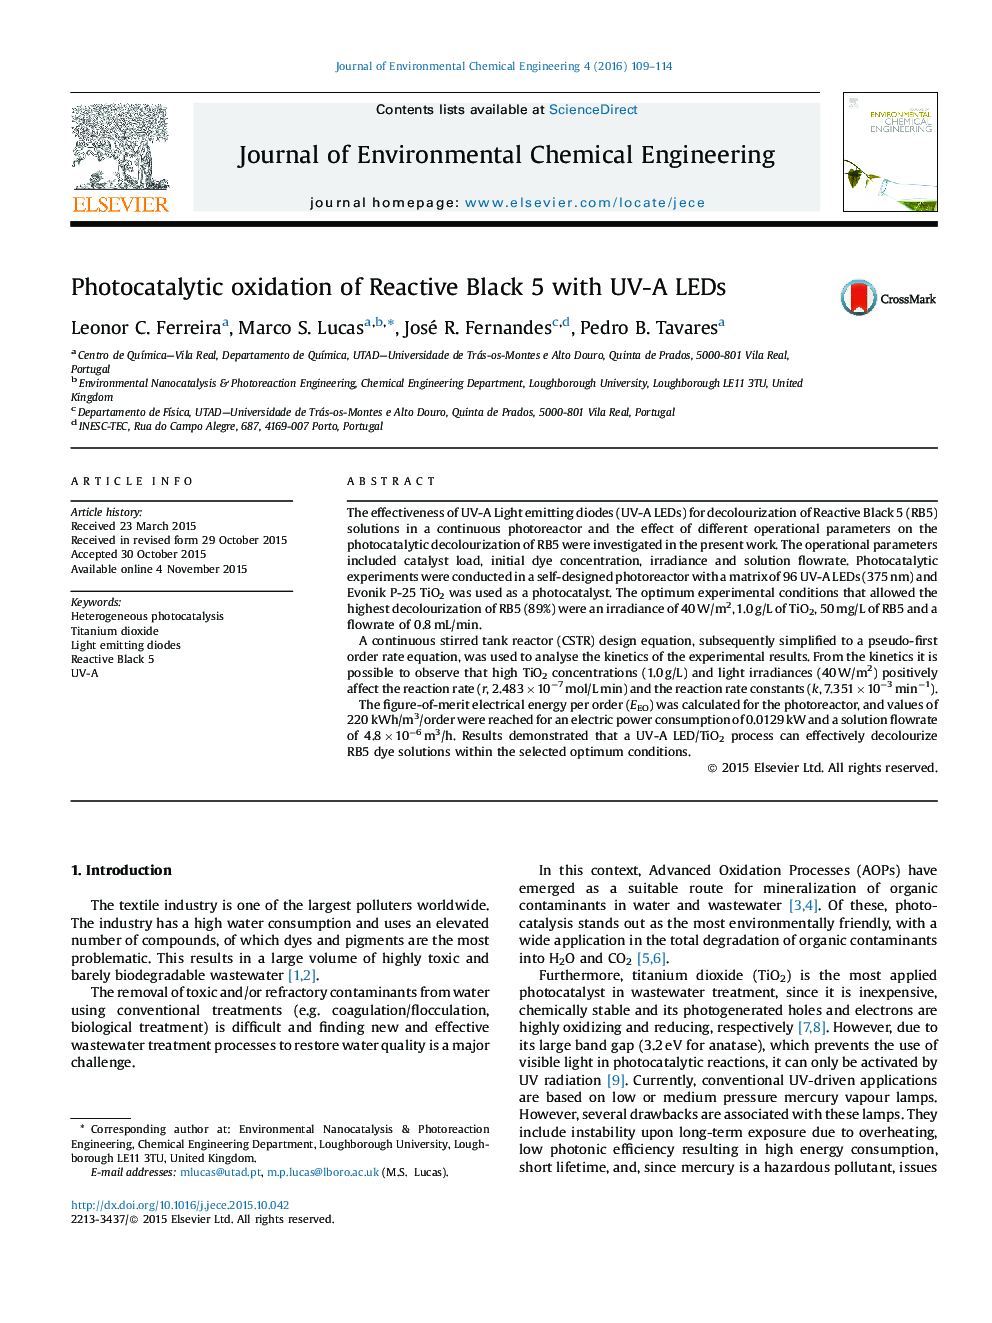 Photocatalytic oxidation of Reactive Black 5 with UV-A LEDs